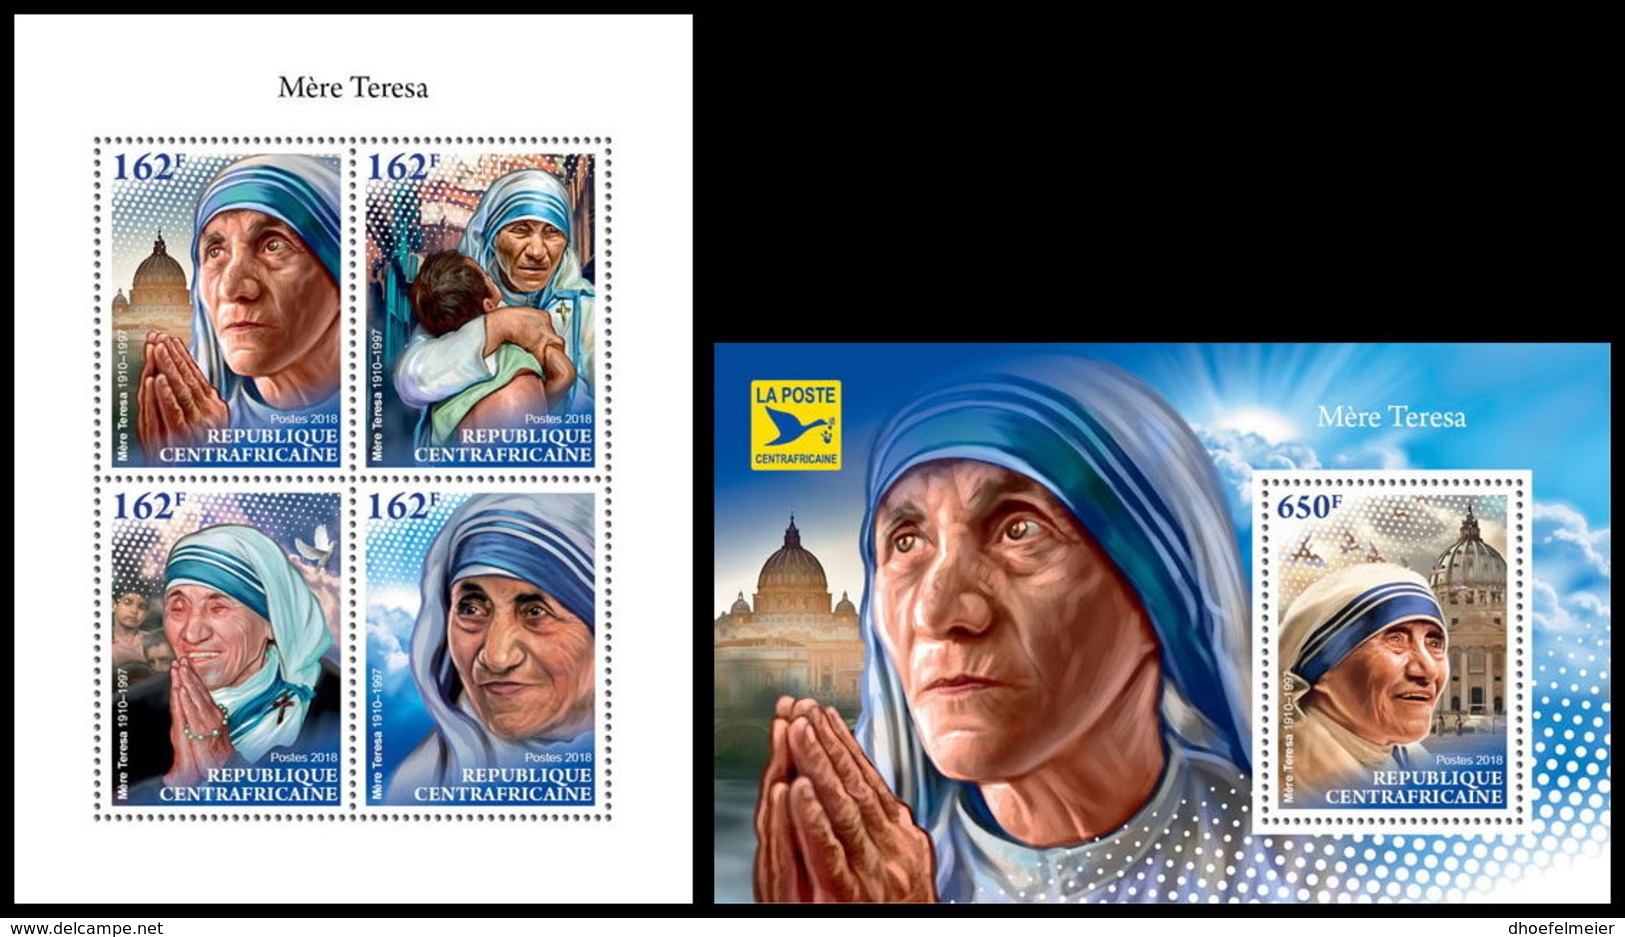 CENTRAL AFRICA 2018 **MNH SMALL Mother Teresa Mutter Teresa Mere Teresa M/S+S/S - IMPERFORATED - DH1845 - Mère Teresa